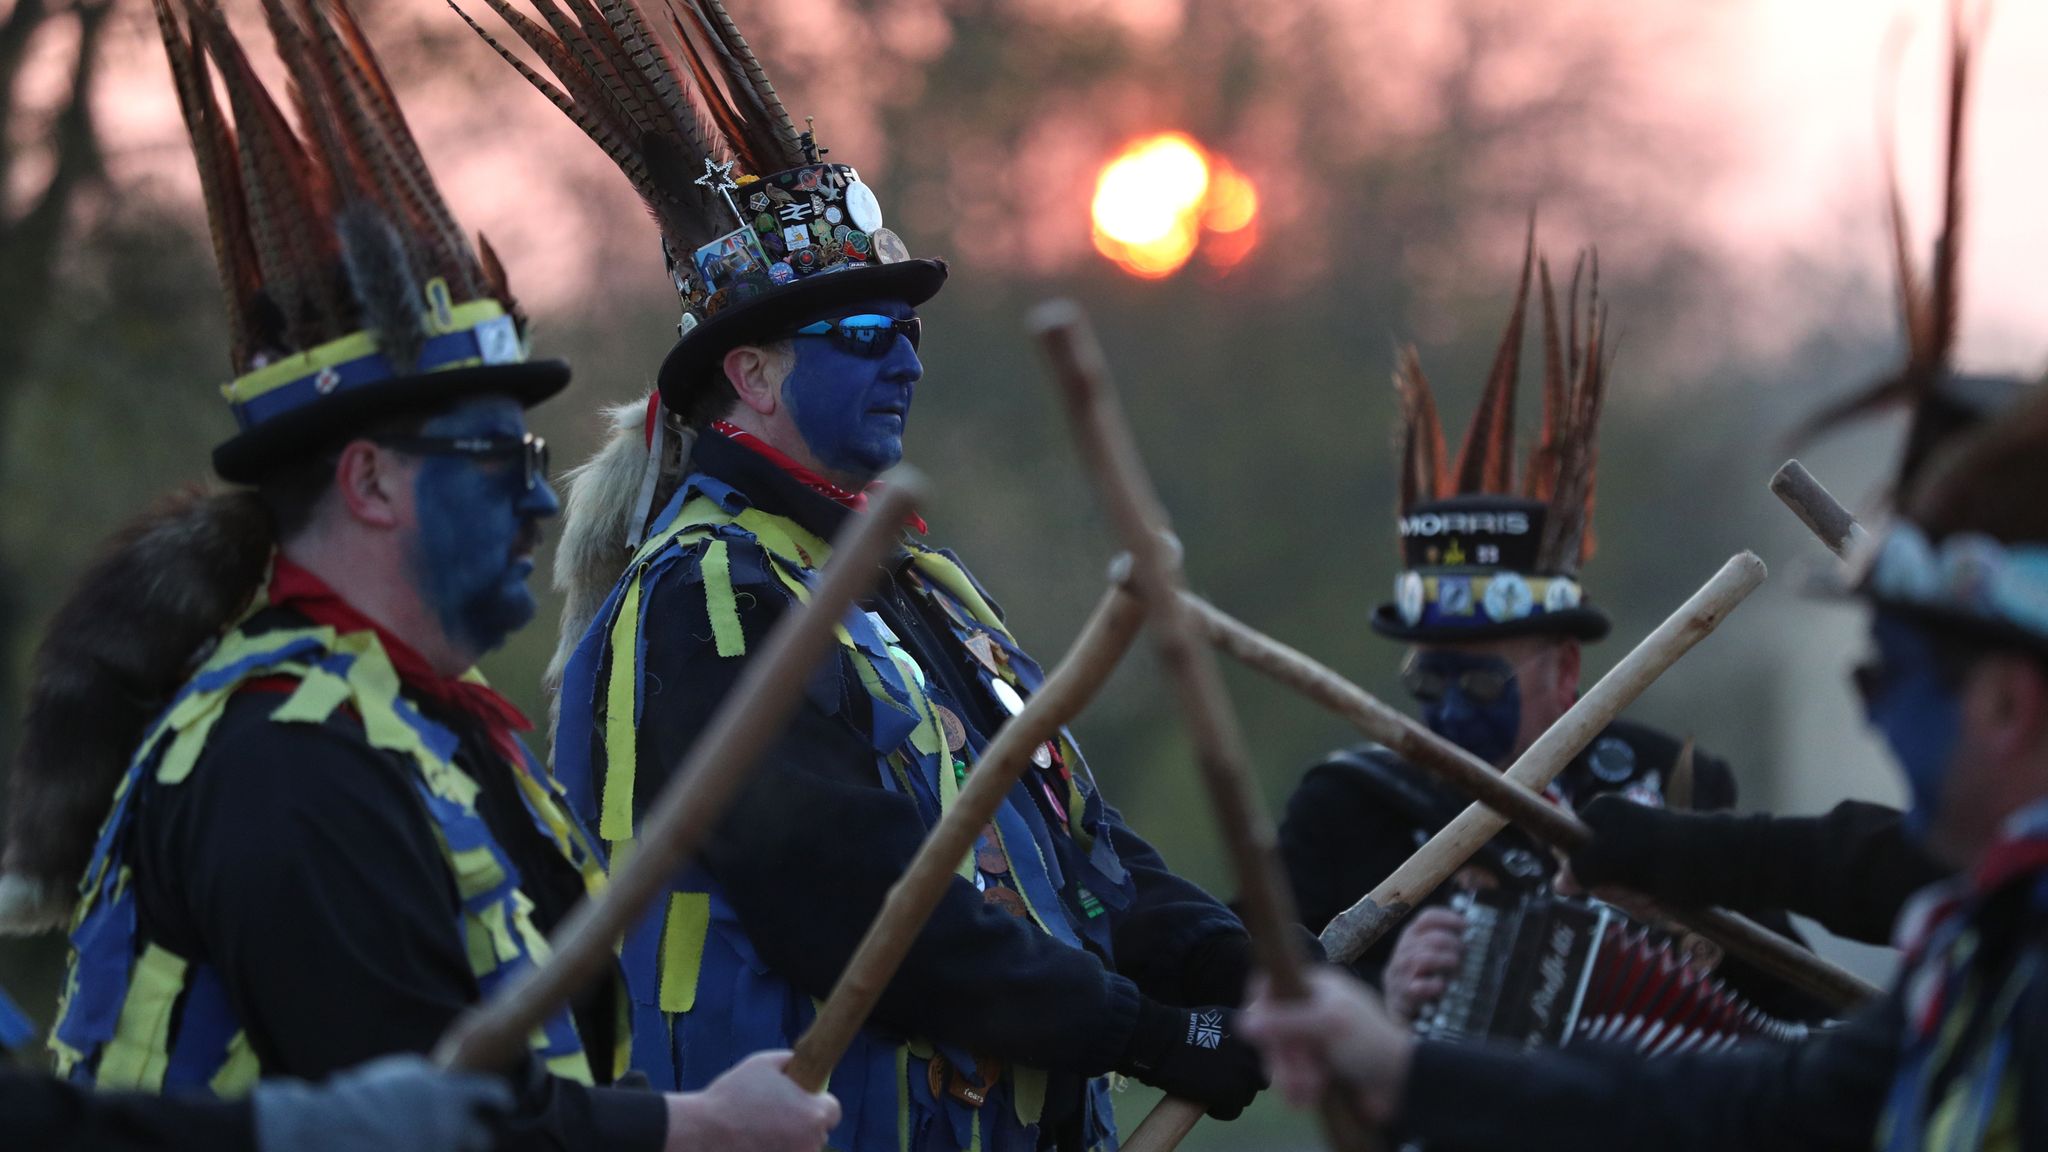 May Day morris dancers swap black face paint for blue over concerns of  racism, May Day